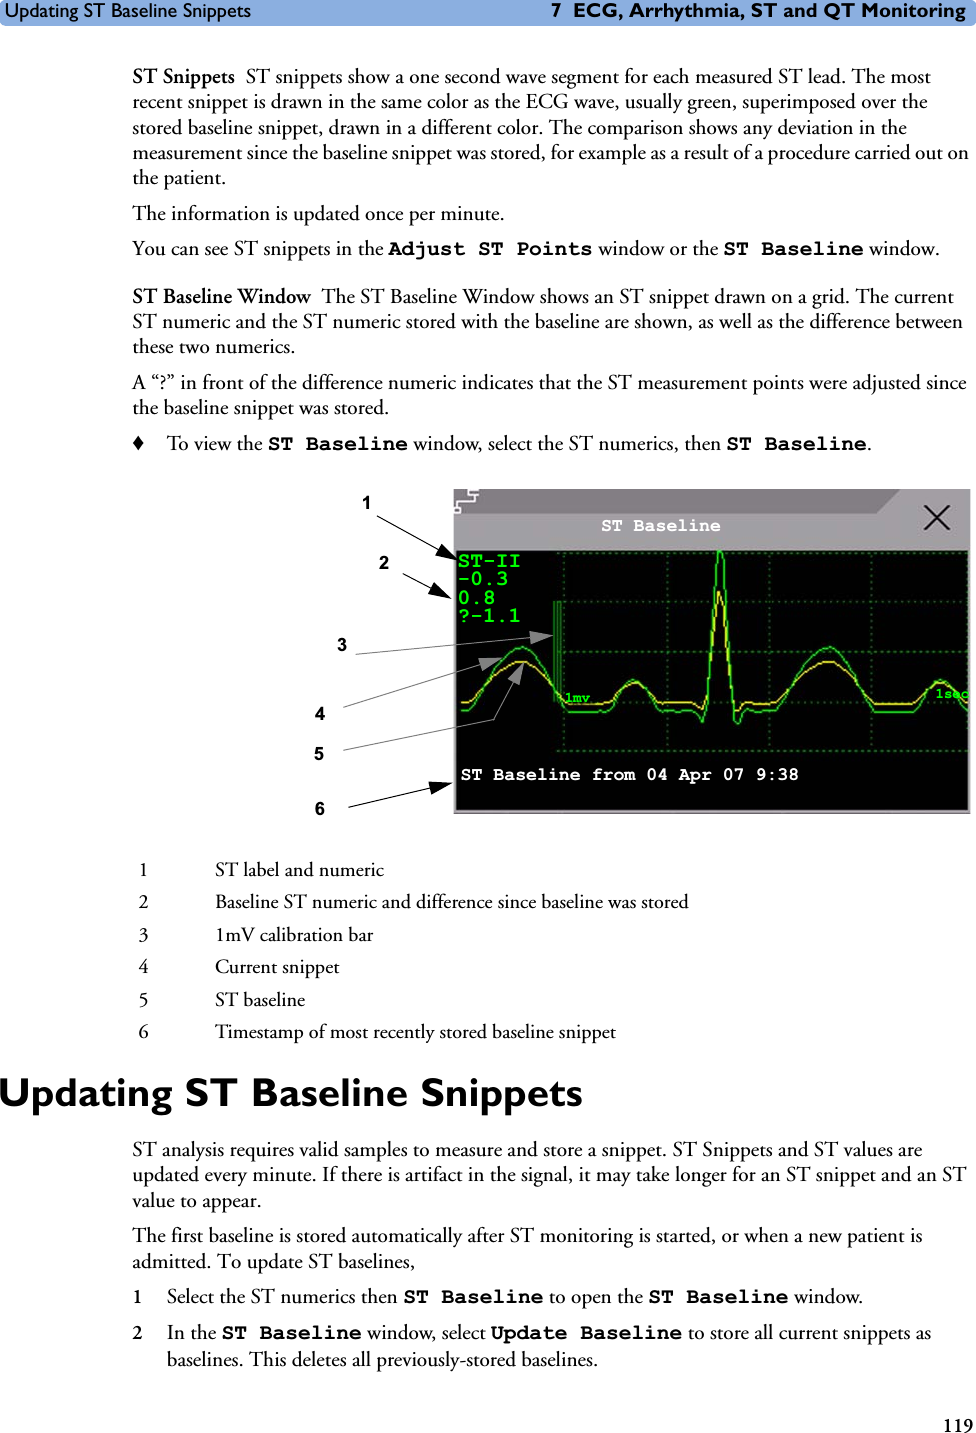 Updating ST Baseline Snippets 7 ECG, Arrhythmia, ST and QT Monitoring119ST Snippets ST snippets show a one second wave segment for each measured ST lead. The most recent snippet is drawn in the same color as the ECG wave, usually green, superimposed over the stored baseline snippet, drawn in a different color. The comparison shows any deviation in the measurement since the baseline snippet was stored, for example as a result of a procedure carried out on the patient.The information is updated once per minute. You can see ST snippets in the Adjust ST Points window or the ST Baseline window. ST Baseline Window The ST Baseline Window shows an ST snippet drawn on a grid. The current ST numeric and the ST numeric stored with the baseline are shown, as well as the difference between these two numerics. A “?” in front of the difference numeric indicates that the ST measurement points were adjusted since the baseline snippet was stored. ♦To vie w th e ST Baseline window, select the ST numerics, then ST Baseline.Updating ST Baseline SnippetsST analysis requires valid samples to measure and store a snippet. ST Snippets and ST values are updated every minute. If there is artifact in the signal, it may take longer for an ST snippet and an ST value to appear. The first baseline is stored automatically after ST monitoring is started, or when a new patient is admitted. To update ST baselines,1Select the ST numerics then ST Baseline to open the ST Baseline window. 2In the ST Baseline window, select Update Baseline to store all current snippets as baselines. This deletes all previously-stored baselines.1 ST label and numeric2 Baseline ST numeric and difference since baseline was stored3 1mV calibration bar4Current snippet5ST baseline6 Timestamp of most recently stored baseline snippet1ST Baseline from 04 Apr 07 9:386 ST Baseline3452ST-II-0.30.8?-1.11mv 1sec